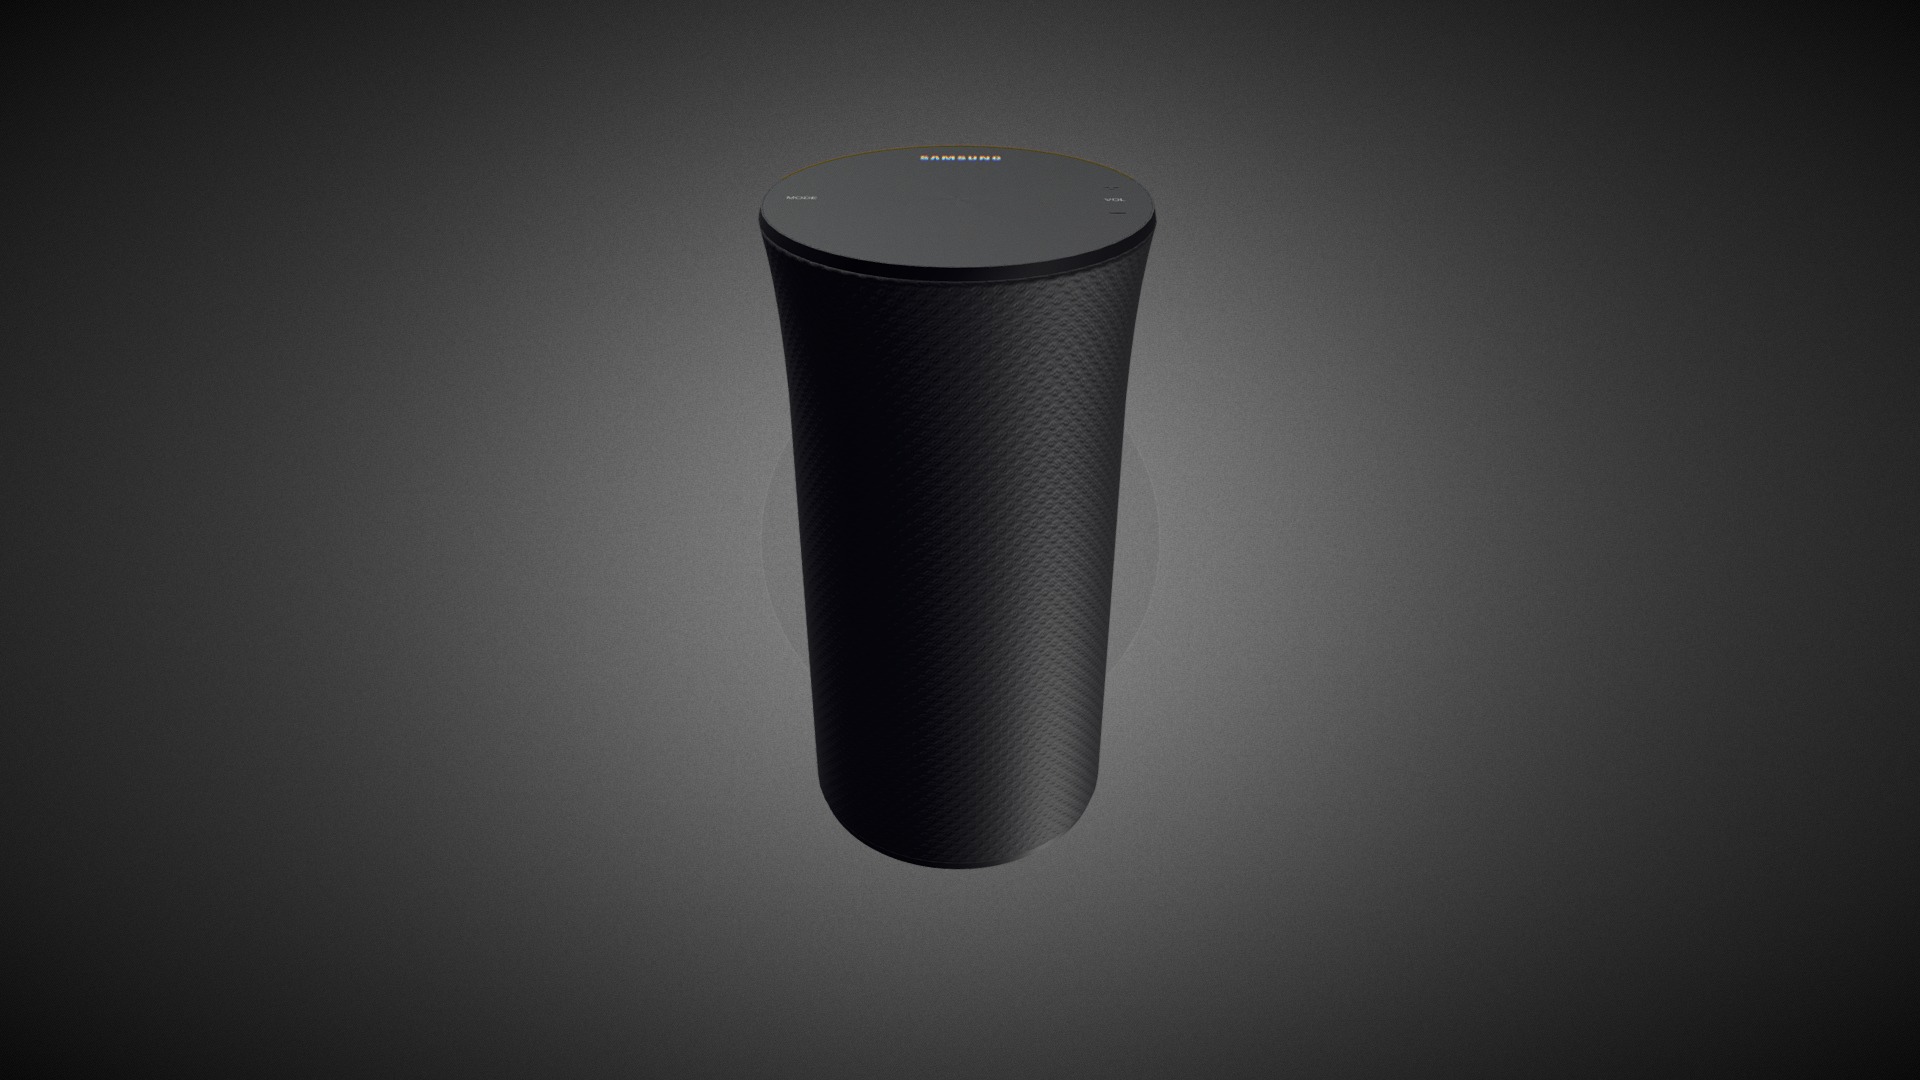 3D model Samsung Radiant360 R1 for Element 3D - This is a 3D model of the Samsung Radiant360 R1 for Element 3D. The 3D model is about a black cylindrical object.